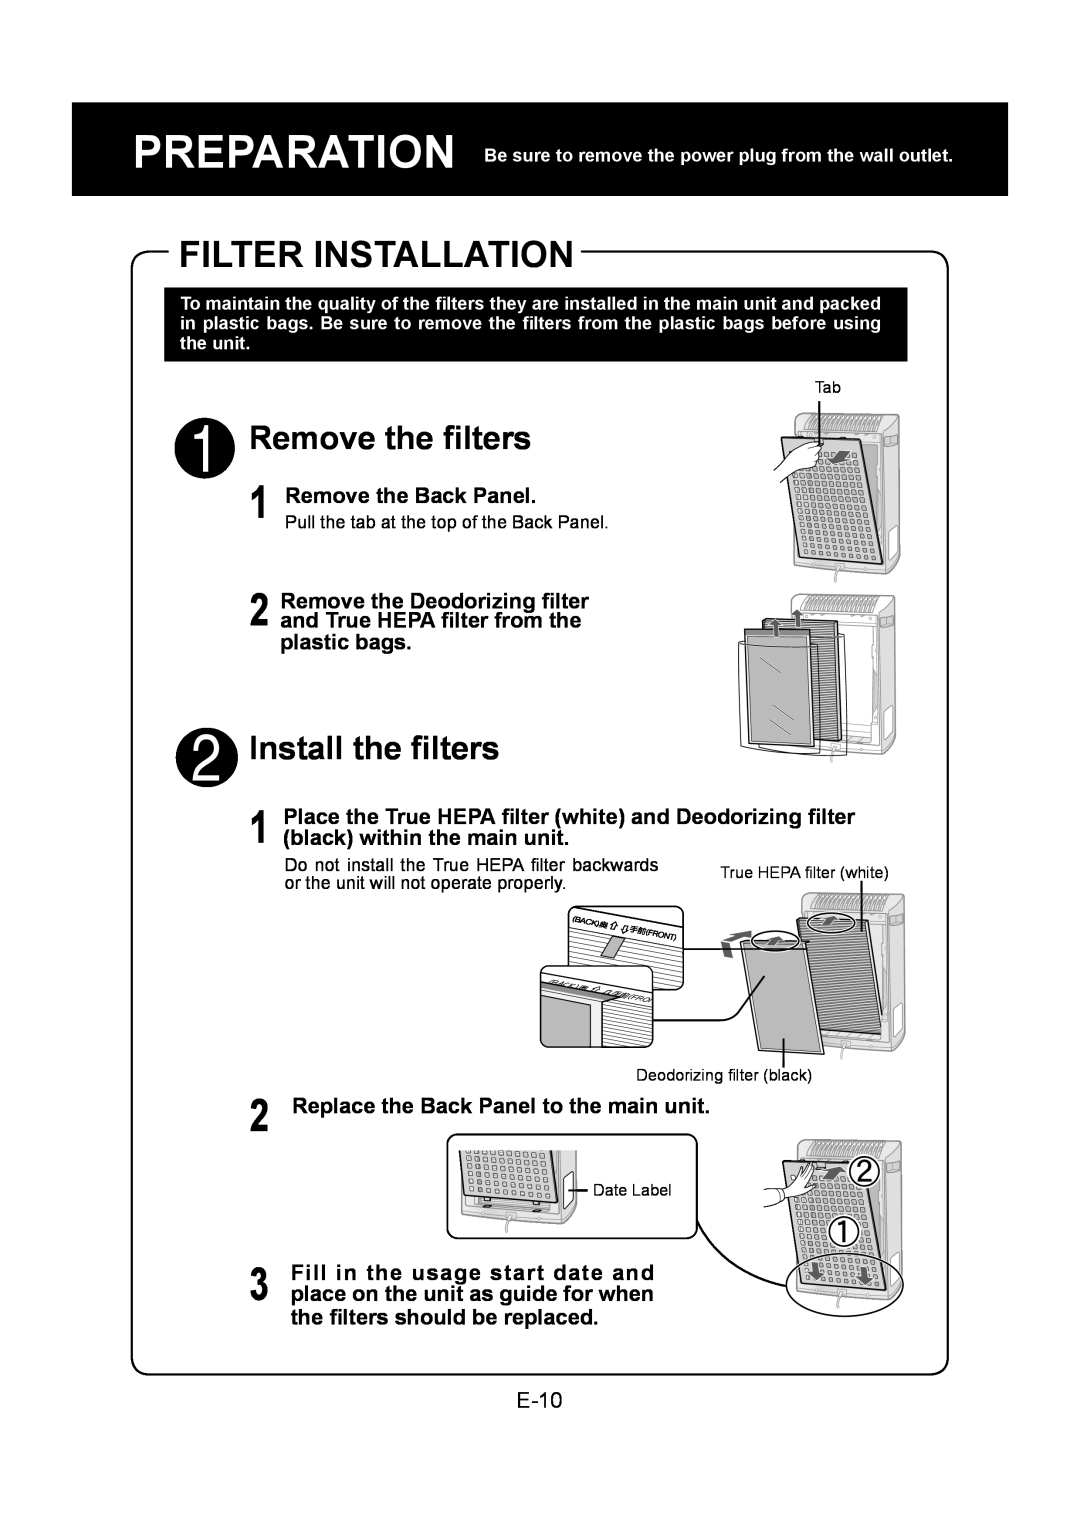 Sharp KC-830U operation manual Filter Installation, Remove the ﬁlters, Install the ﬁlters 